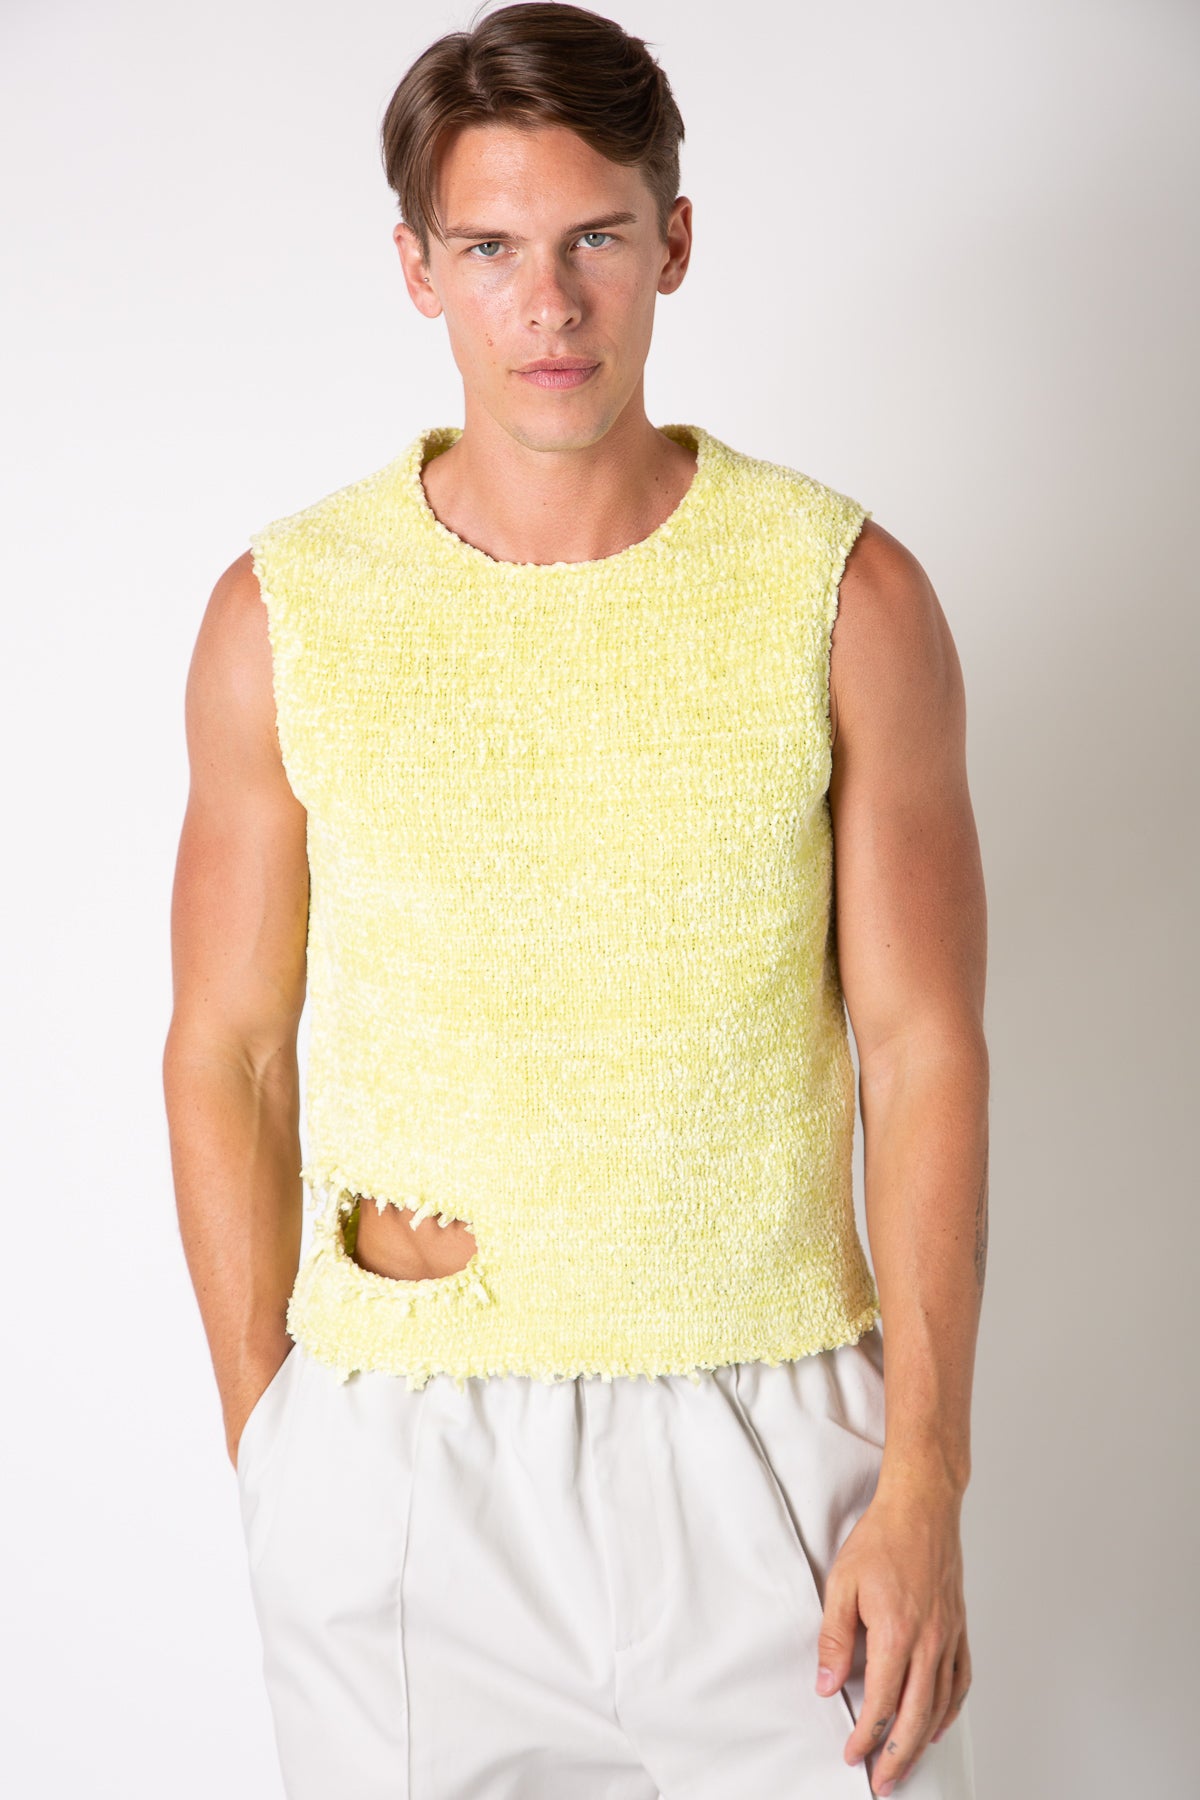 Jil Sander distressed-finish knitted top - Yellow